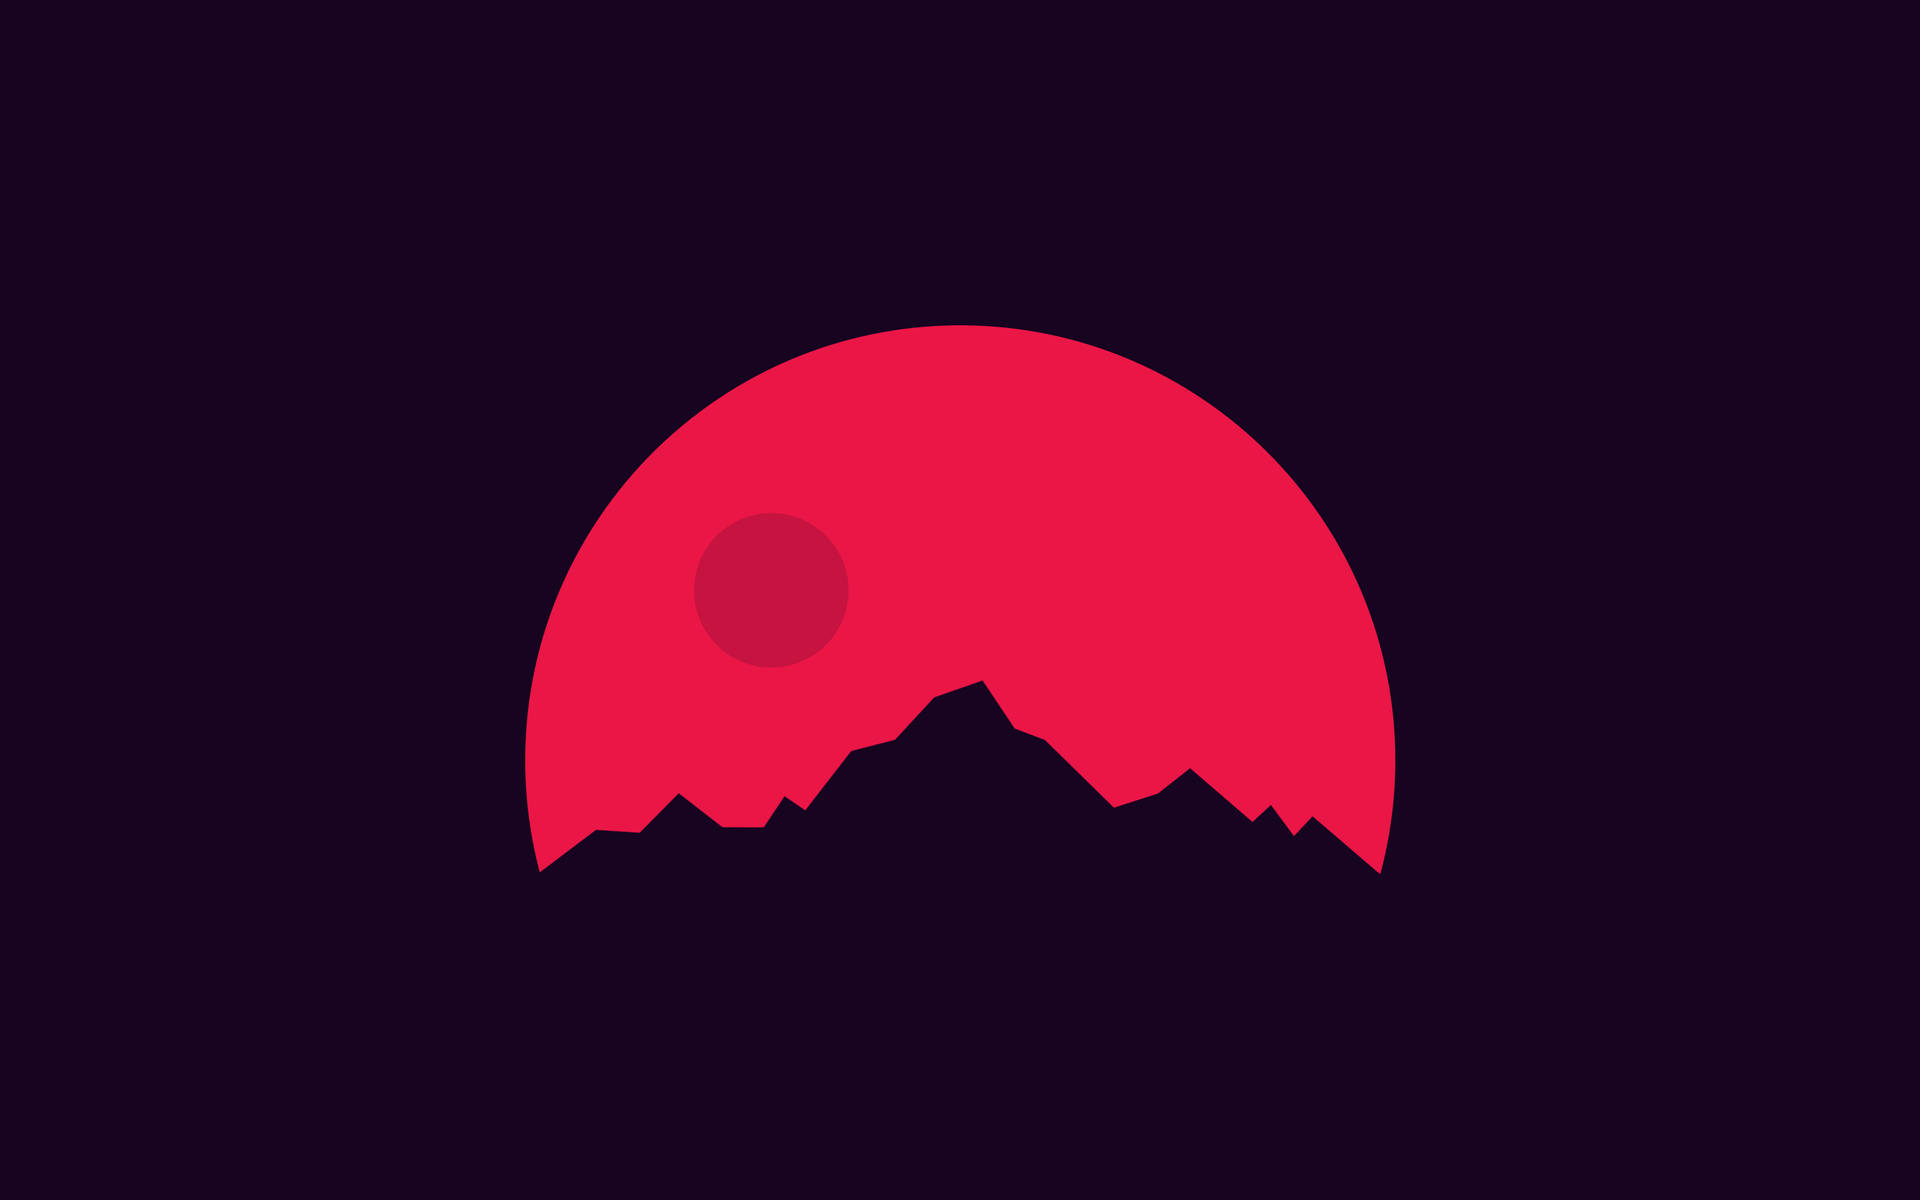 The Minimalist Beauty of the Red Moon Wallpaper